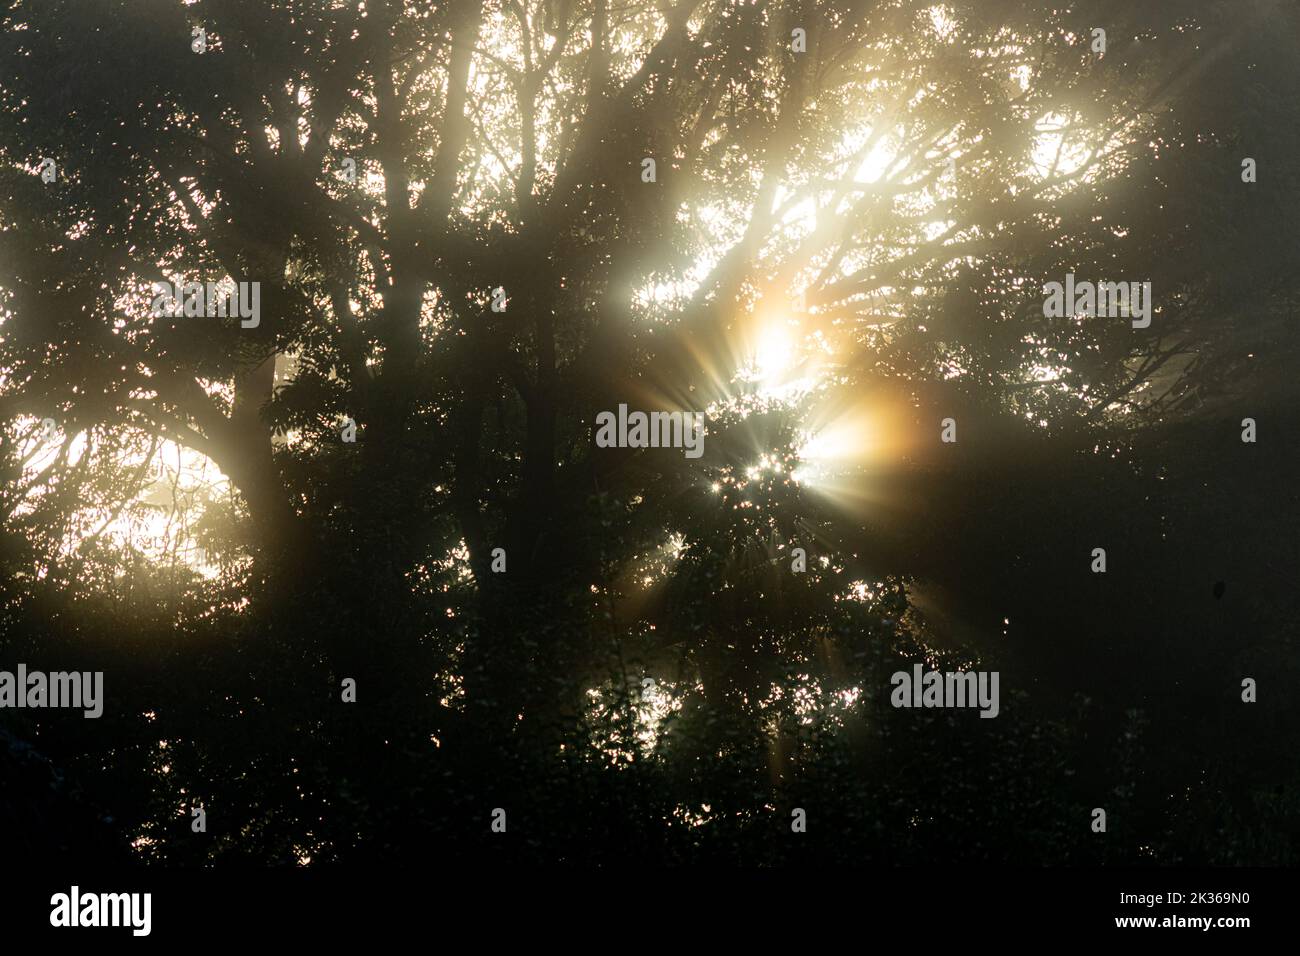 Enchanted forest - sunlight filtering through branches on a hazy morning gives an impression of magical light Stock Photo